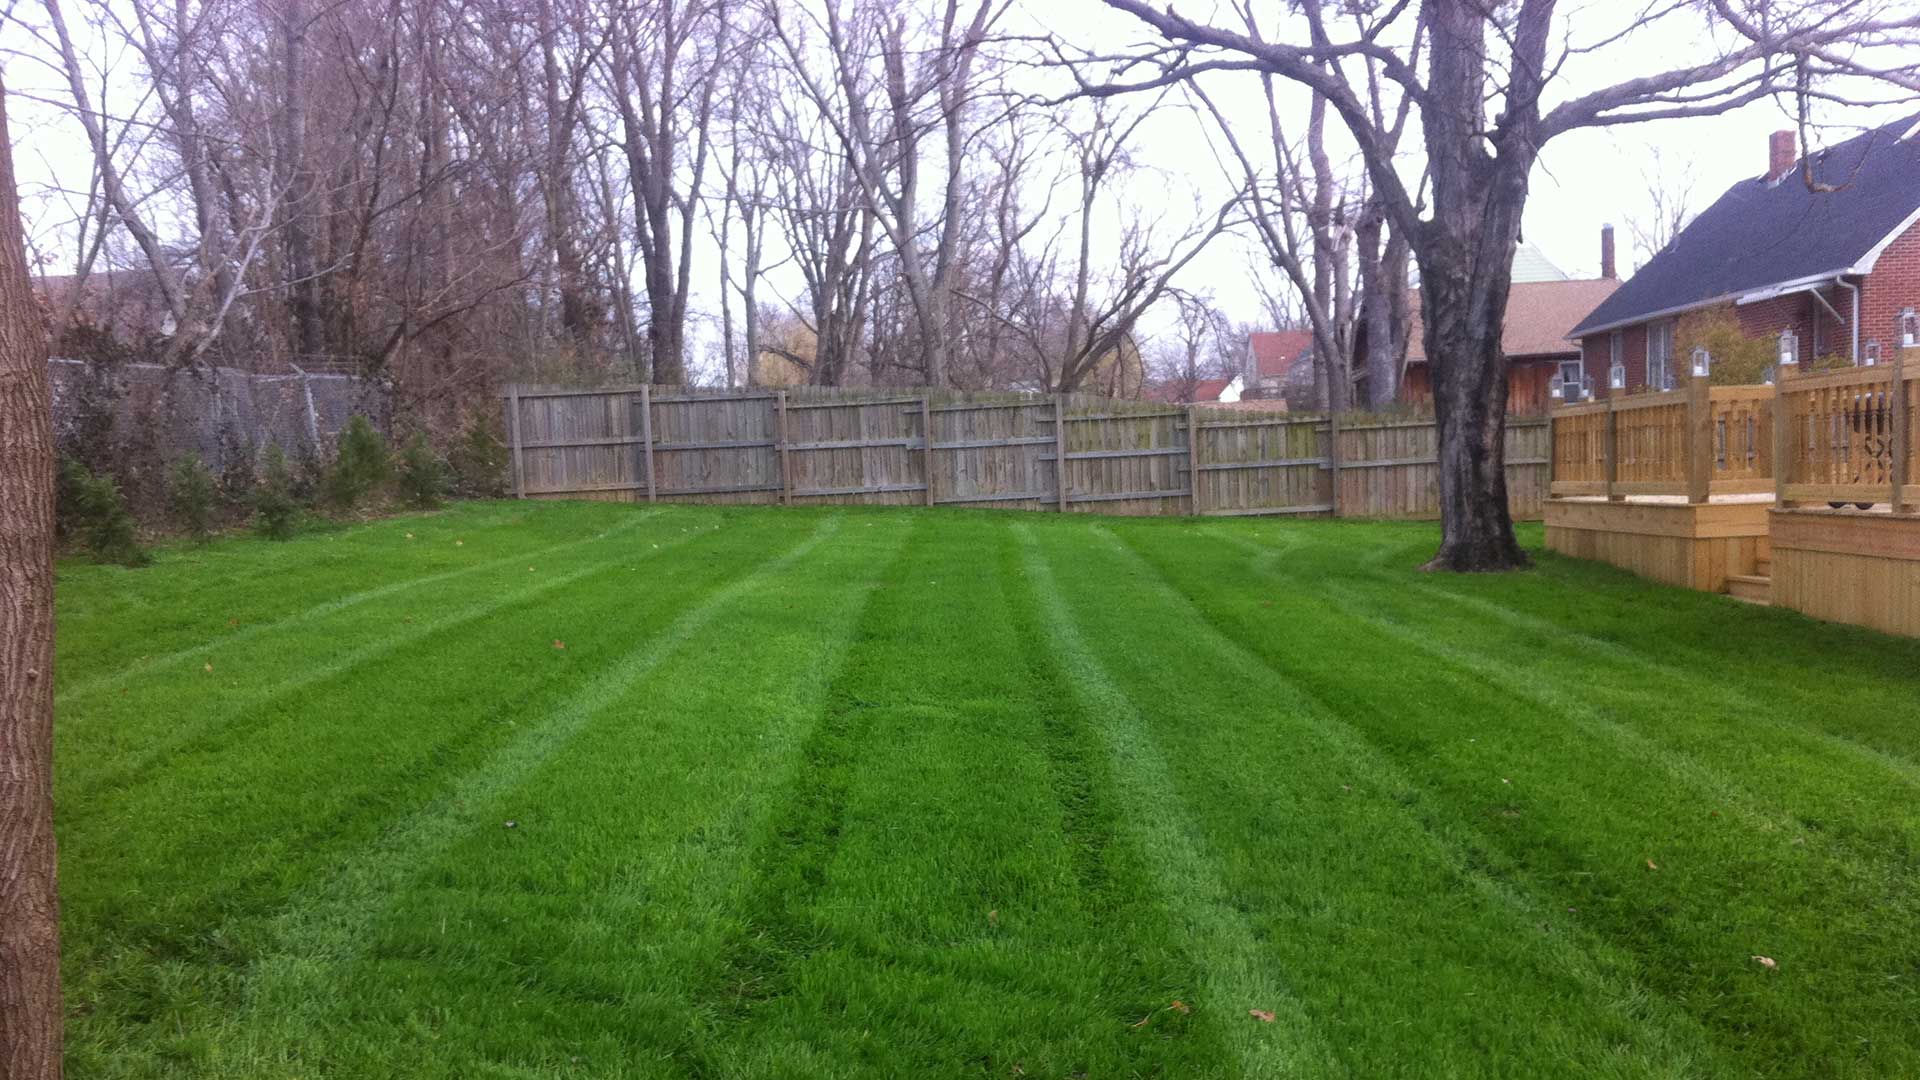 Healthy, fertilized, recently mowed and cared for by Phillips Bros Lawn Care.